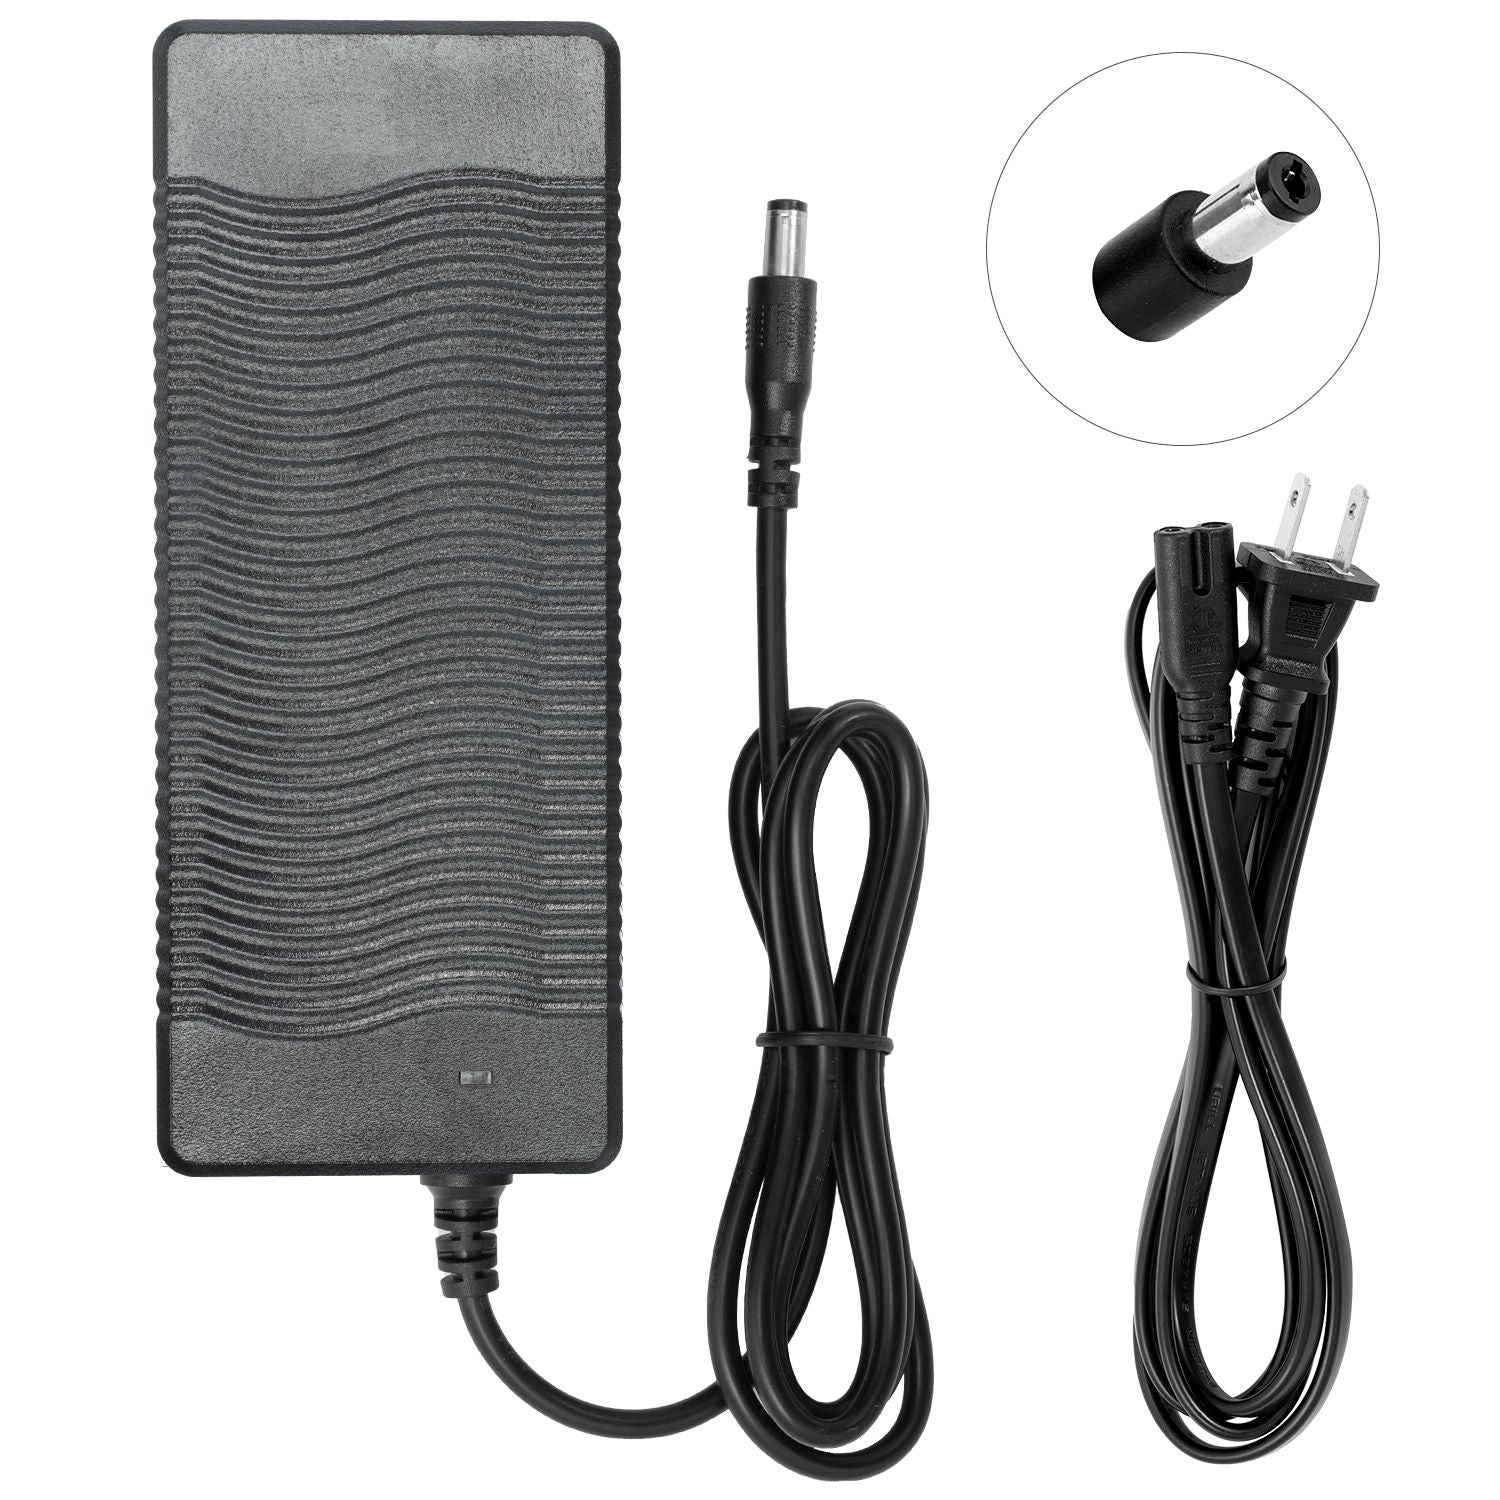 Charger for Rad Power RadCity 5 Plus eBike